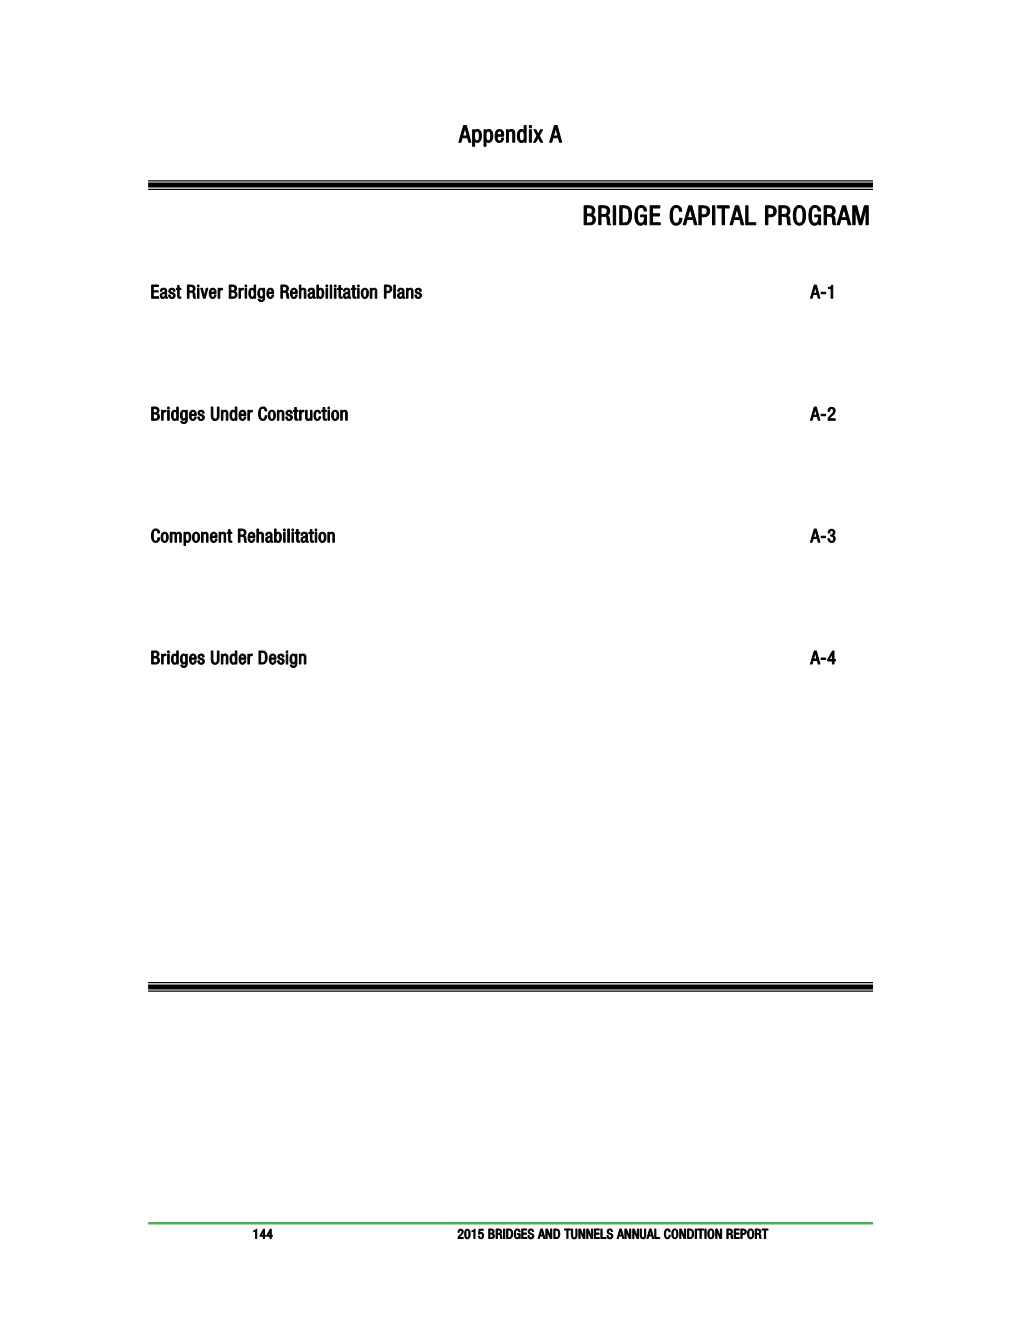 2015 NYC Bridges and Tunnels Condition Report